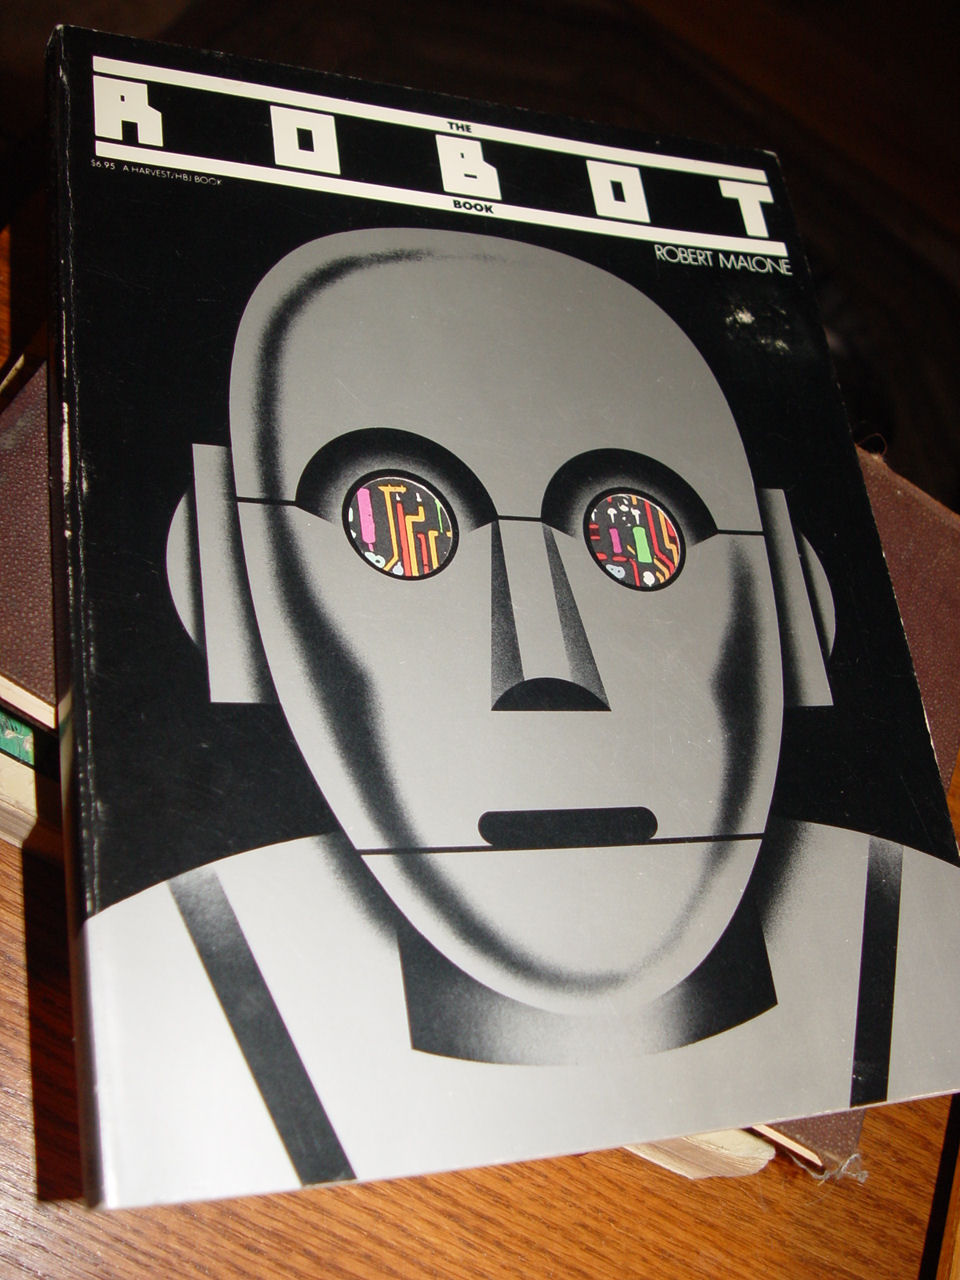 The Robot Book 1978 by Robert Malone